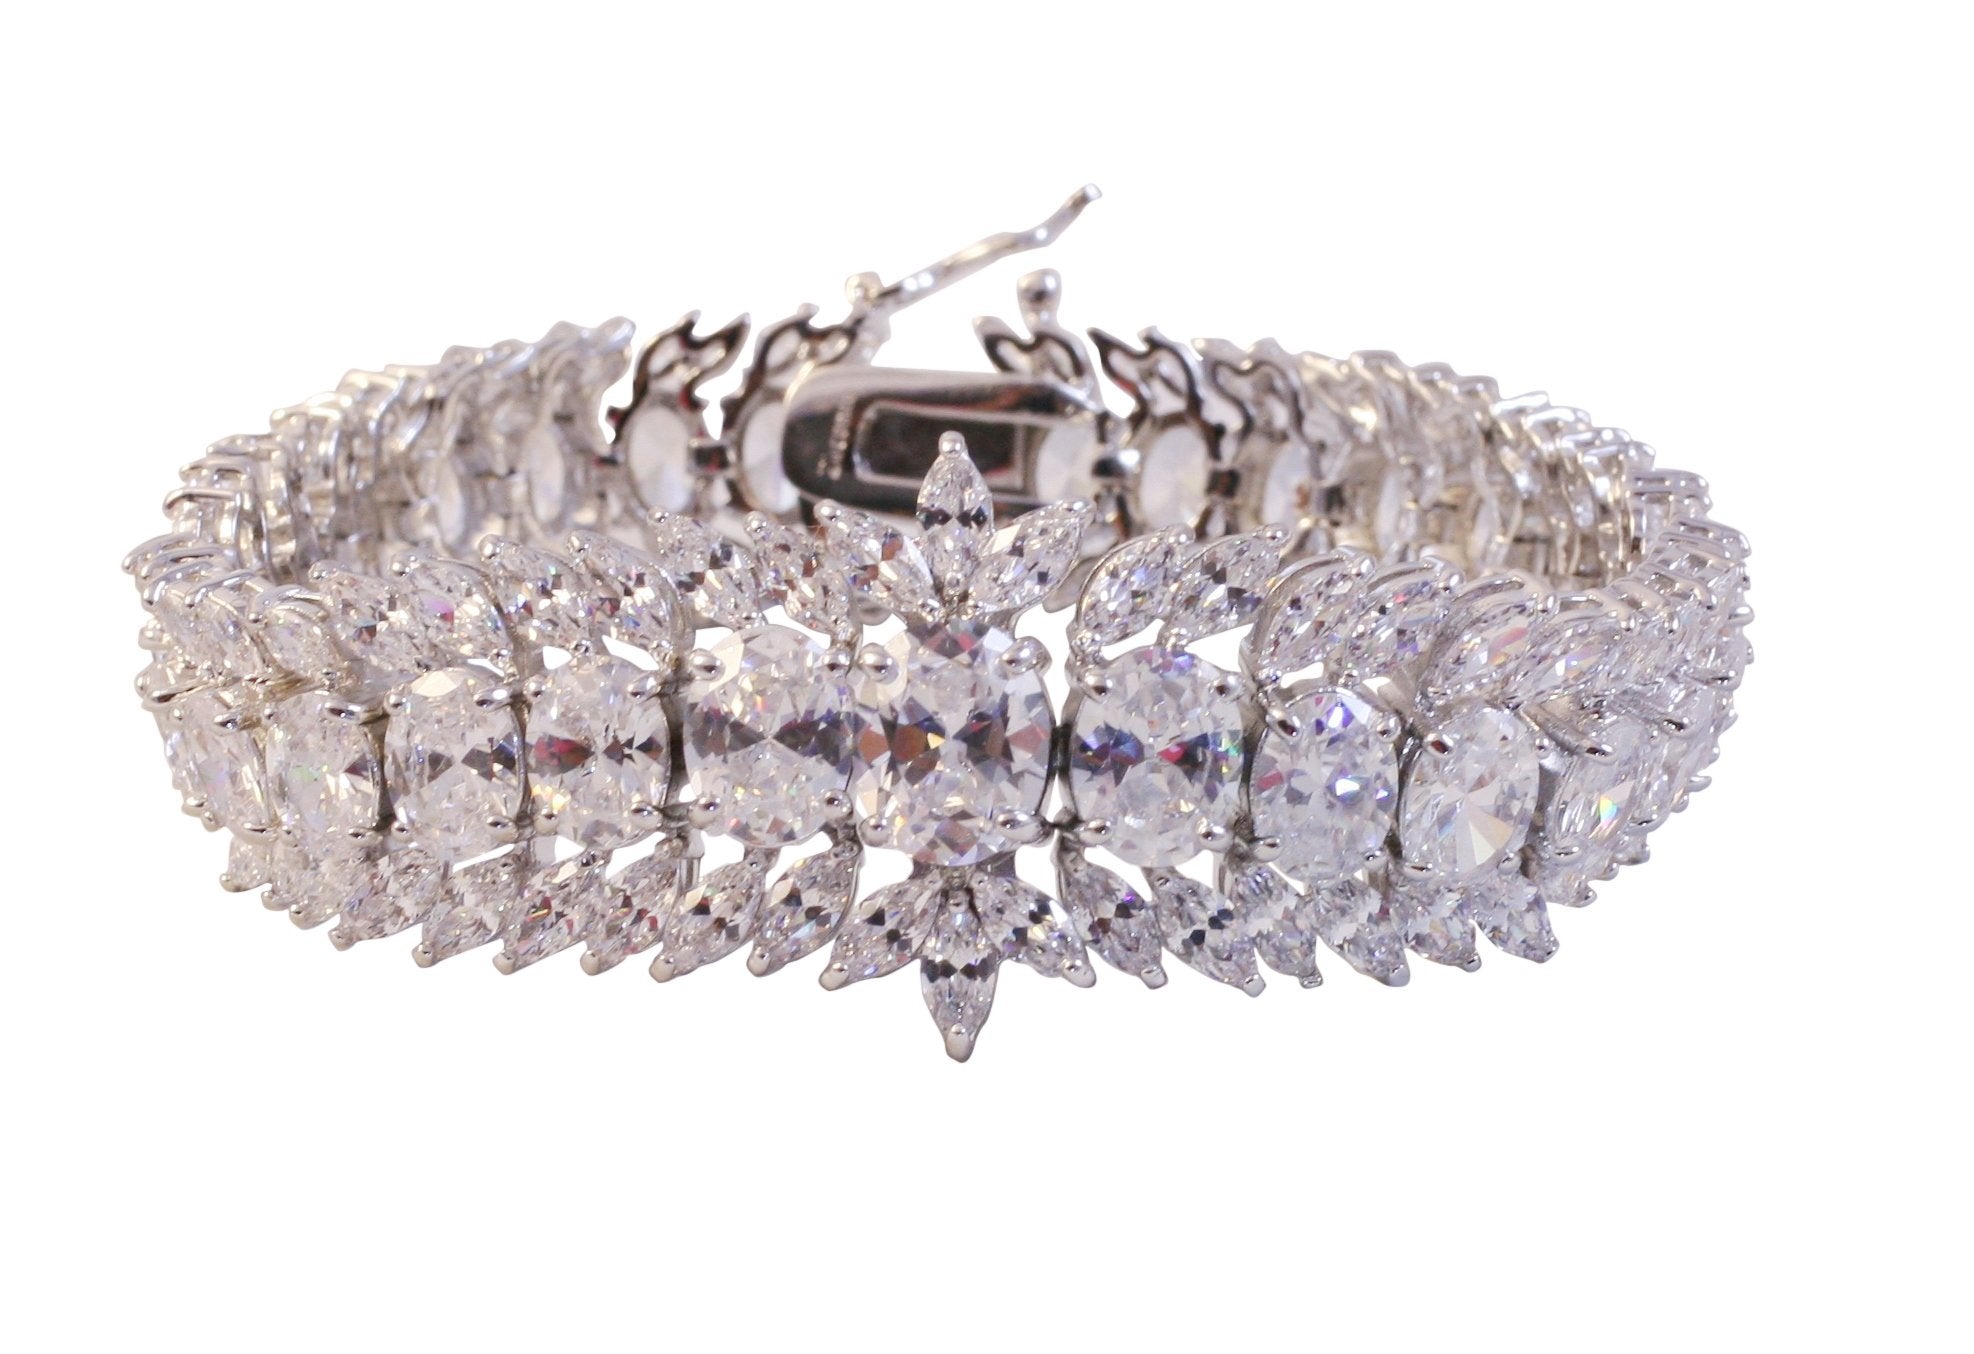 Fancy Mixed Cut Zirconite Cubic Zirconia Ornate Bracelet featuring brilliant Marquise and Oval stones in a uniformed sophisticated pattern 501B31913